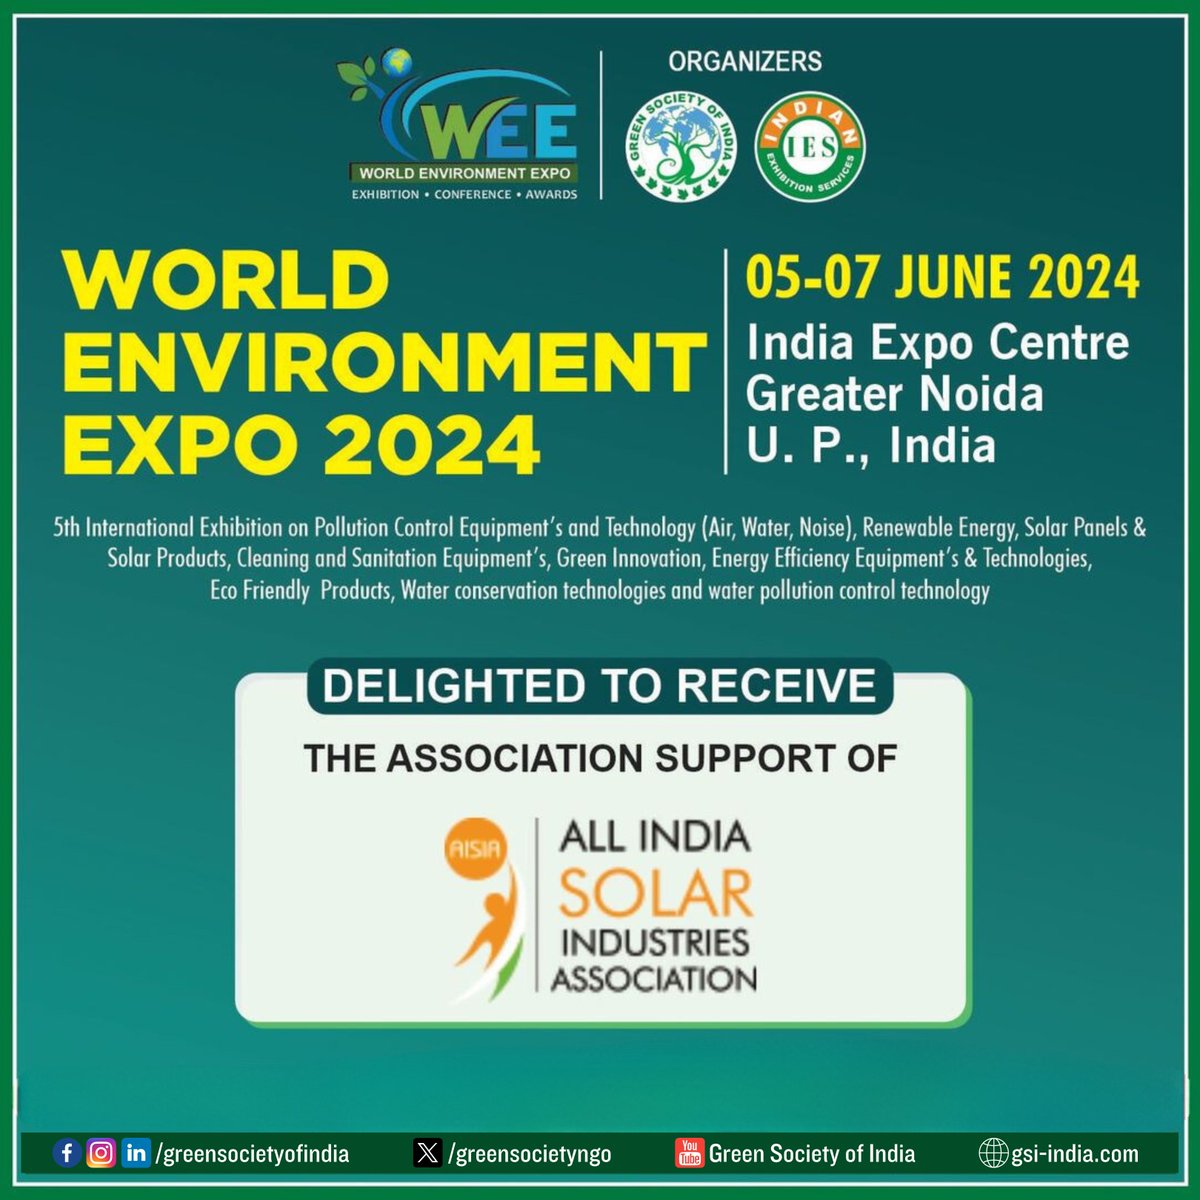 We're thrilled to announce that the All India Solar Industries Association will participate in the World Environment Expo 2024 as our Association Partner, happening from June 5th to 7th at the India Expo Centre, Greater Noida, Uttar Pradesh, India. #WorldEnvironmentExpo2024 #GSI